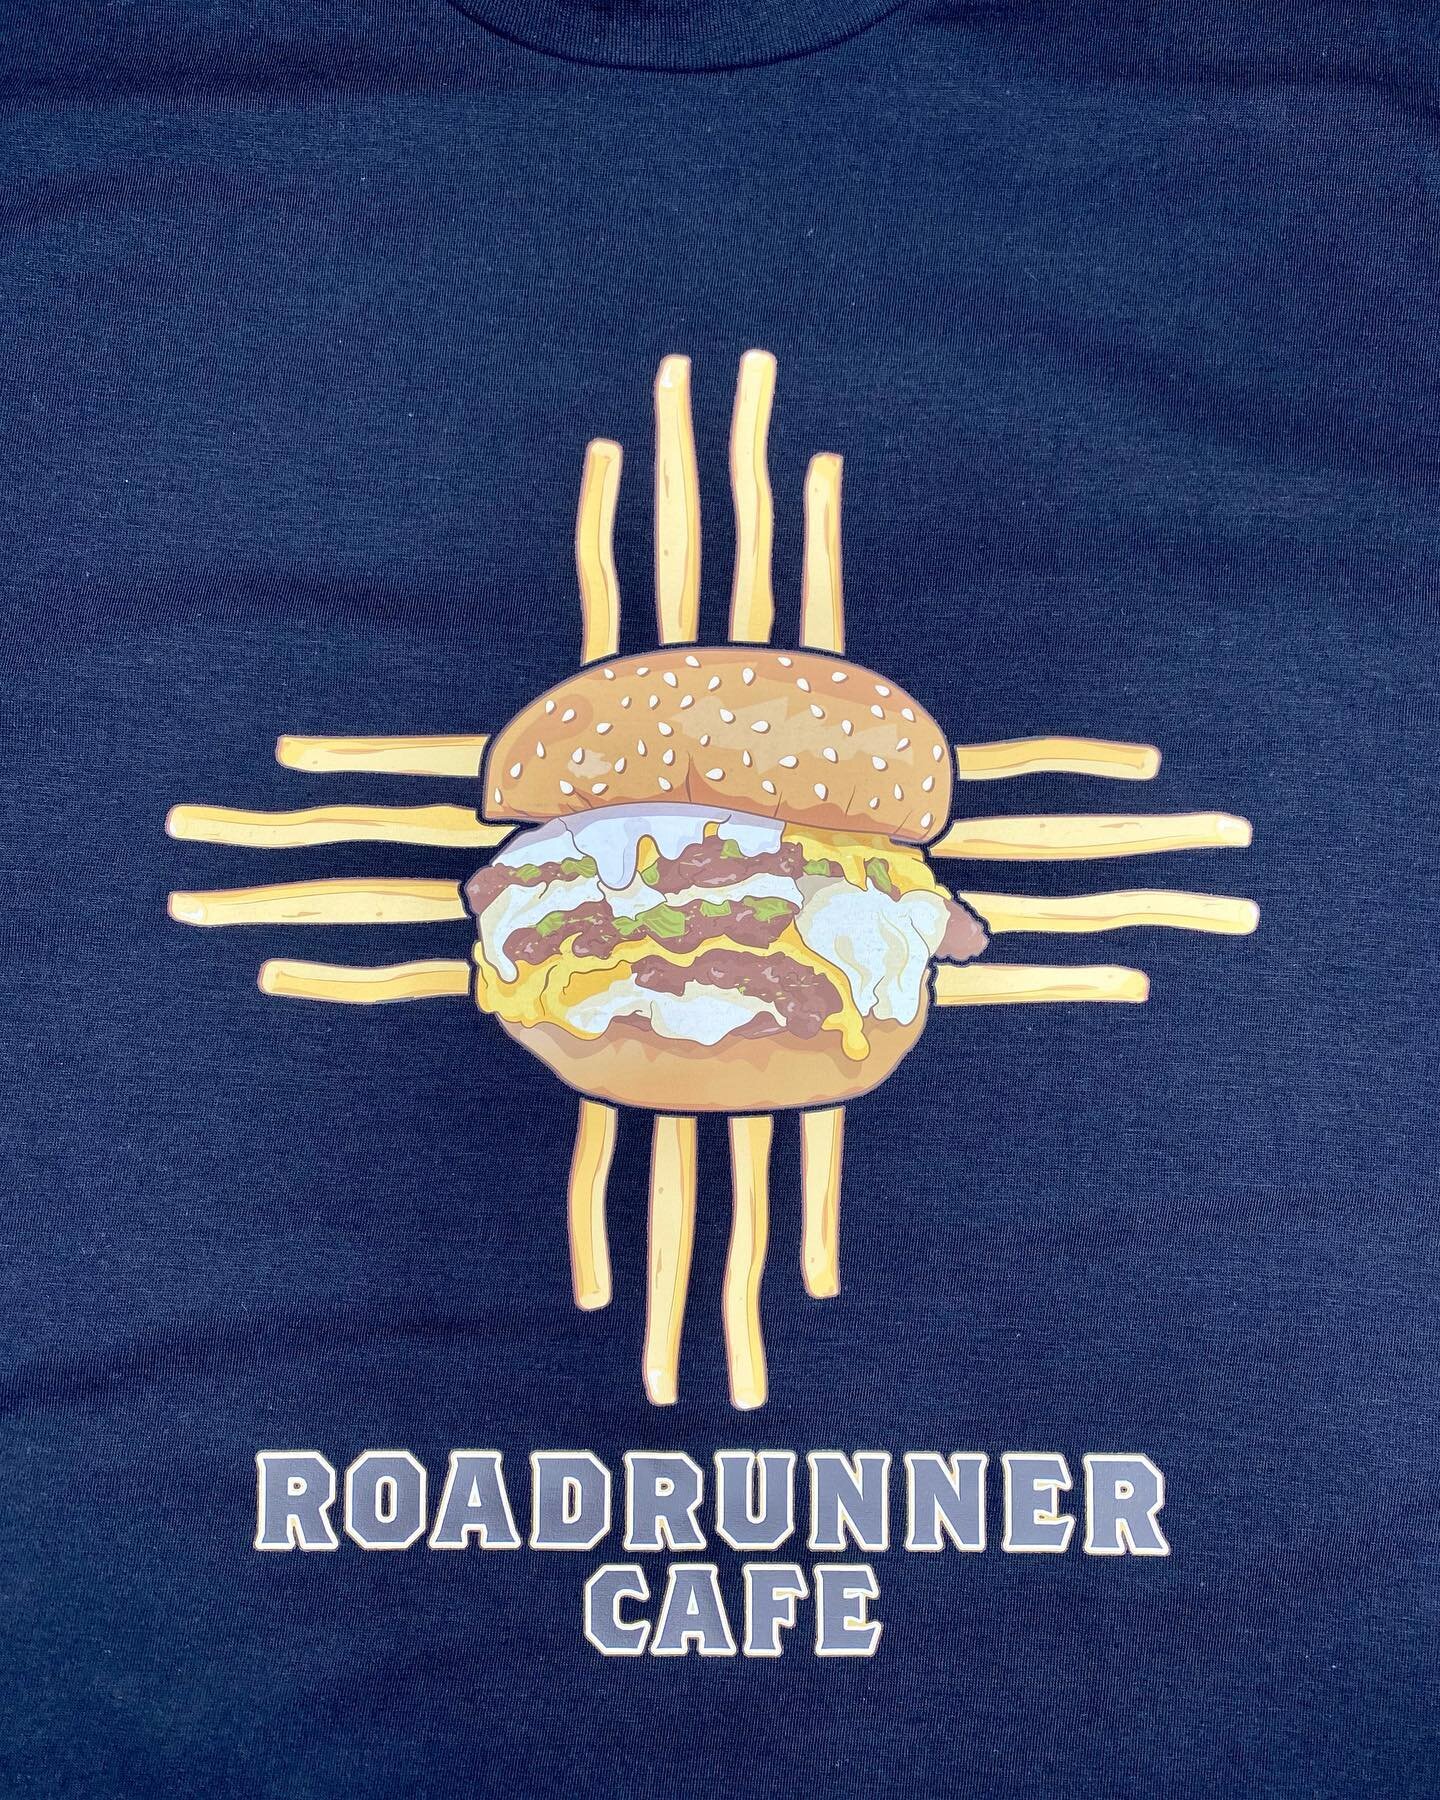 Go to @roadrunnercafenm to get the best burger in town and pick up one of their new shirts!  Thanks again to @jlt21 for the awesome design
.
.
#moonmanprinting #mainstreetroswell #downtownroswell #customprintedtees #supacolor #nextlevelapparel #super